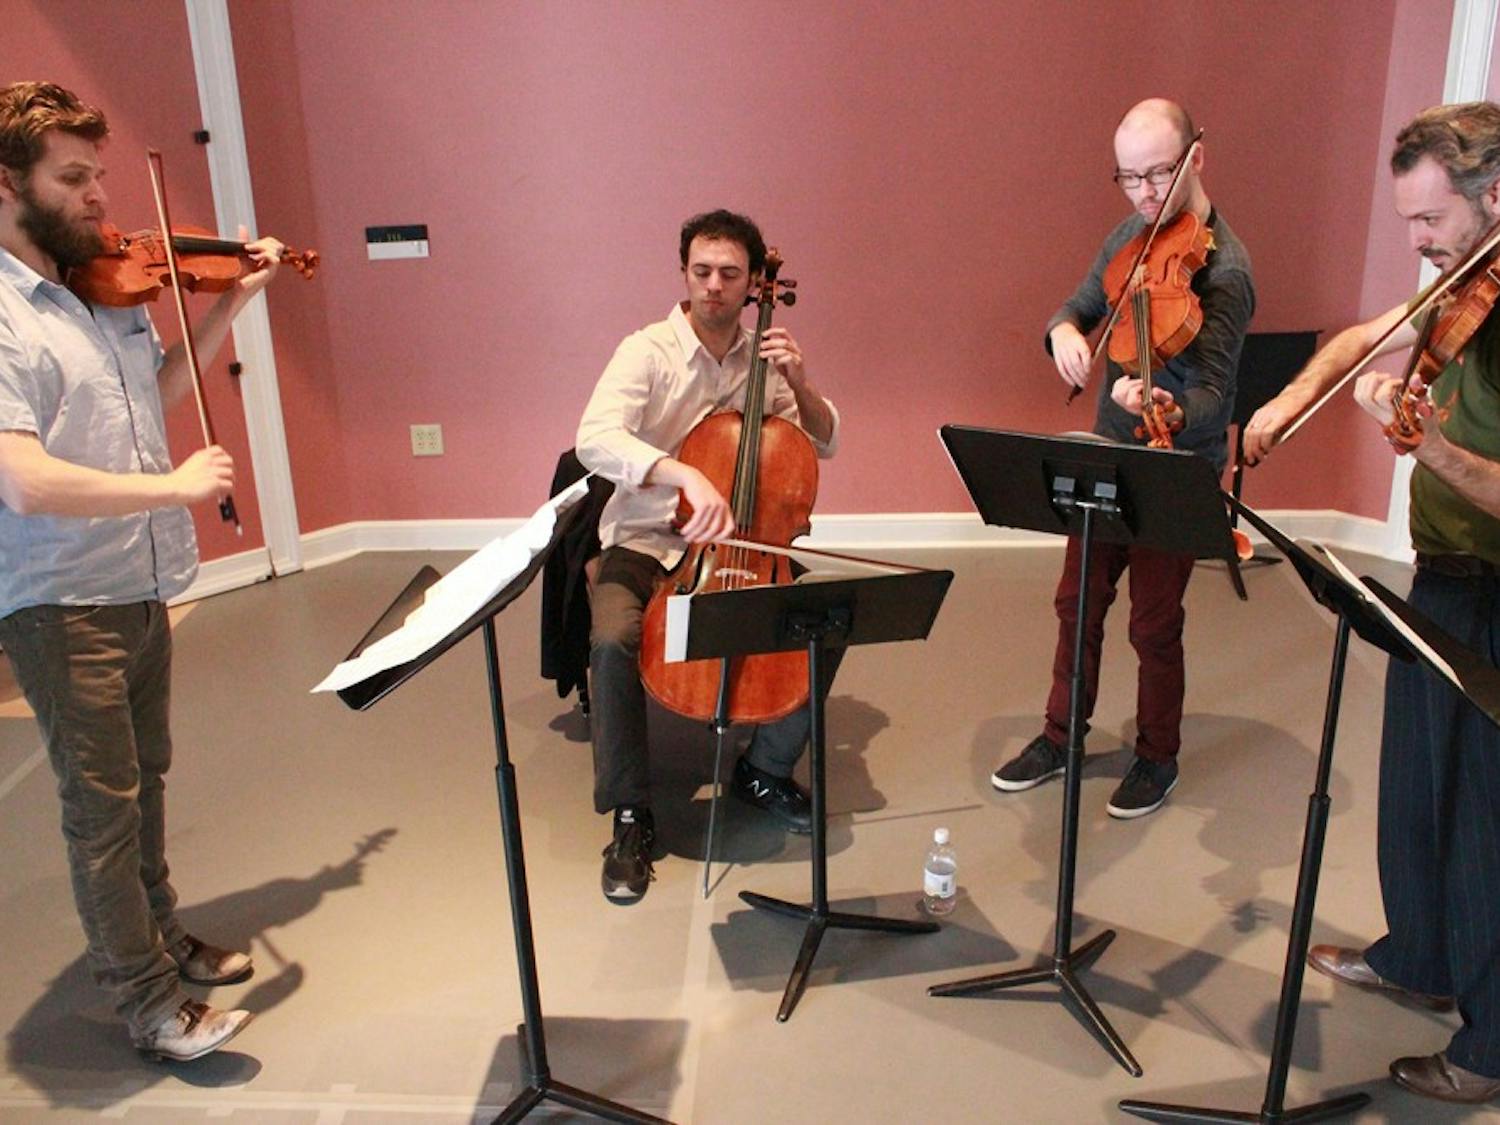 Brooklyn Rider Quartet, pictured Thursday rehearsing at Gerrard Hall, performs on Sunday at Memorial Hall. Members (left to right) Johnny Gandelsman, Eric Jacobsen, Nicholas Cards, and Colin Jacobsen are glad to be back at Carolina for their tenth year; "Music is more than notes on a page, it's life," commented C. Jacobsen on music and its discussion within the university.